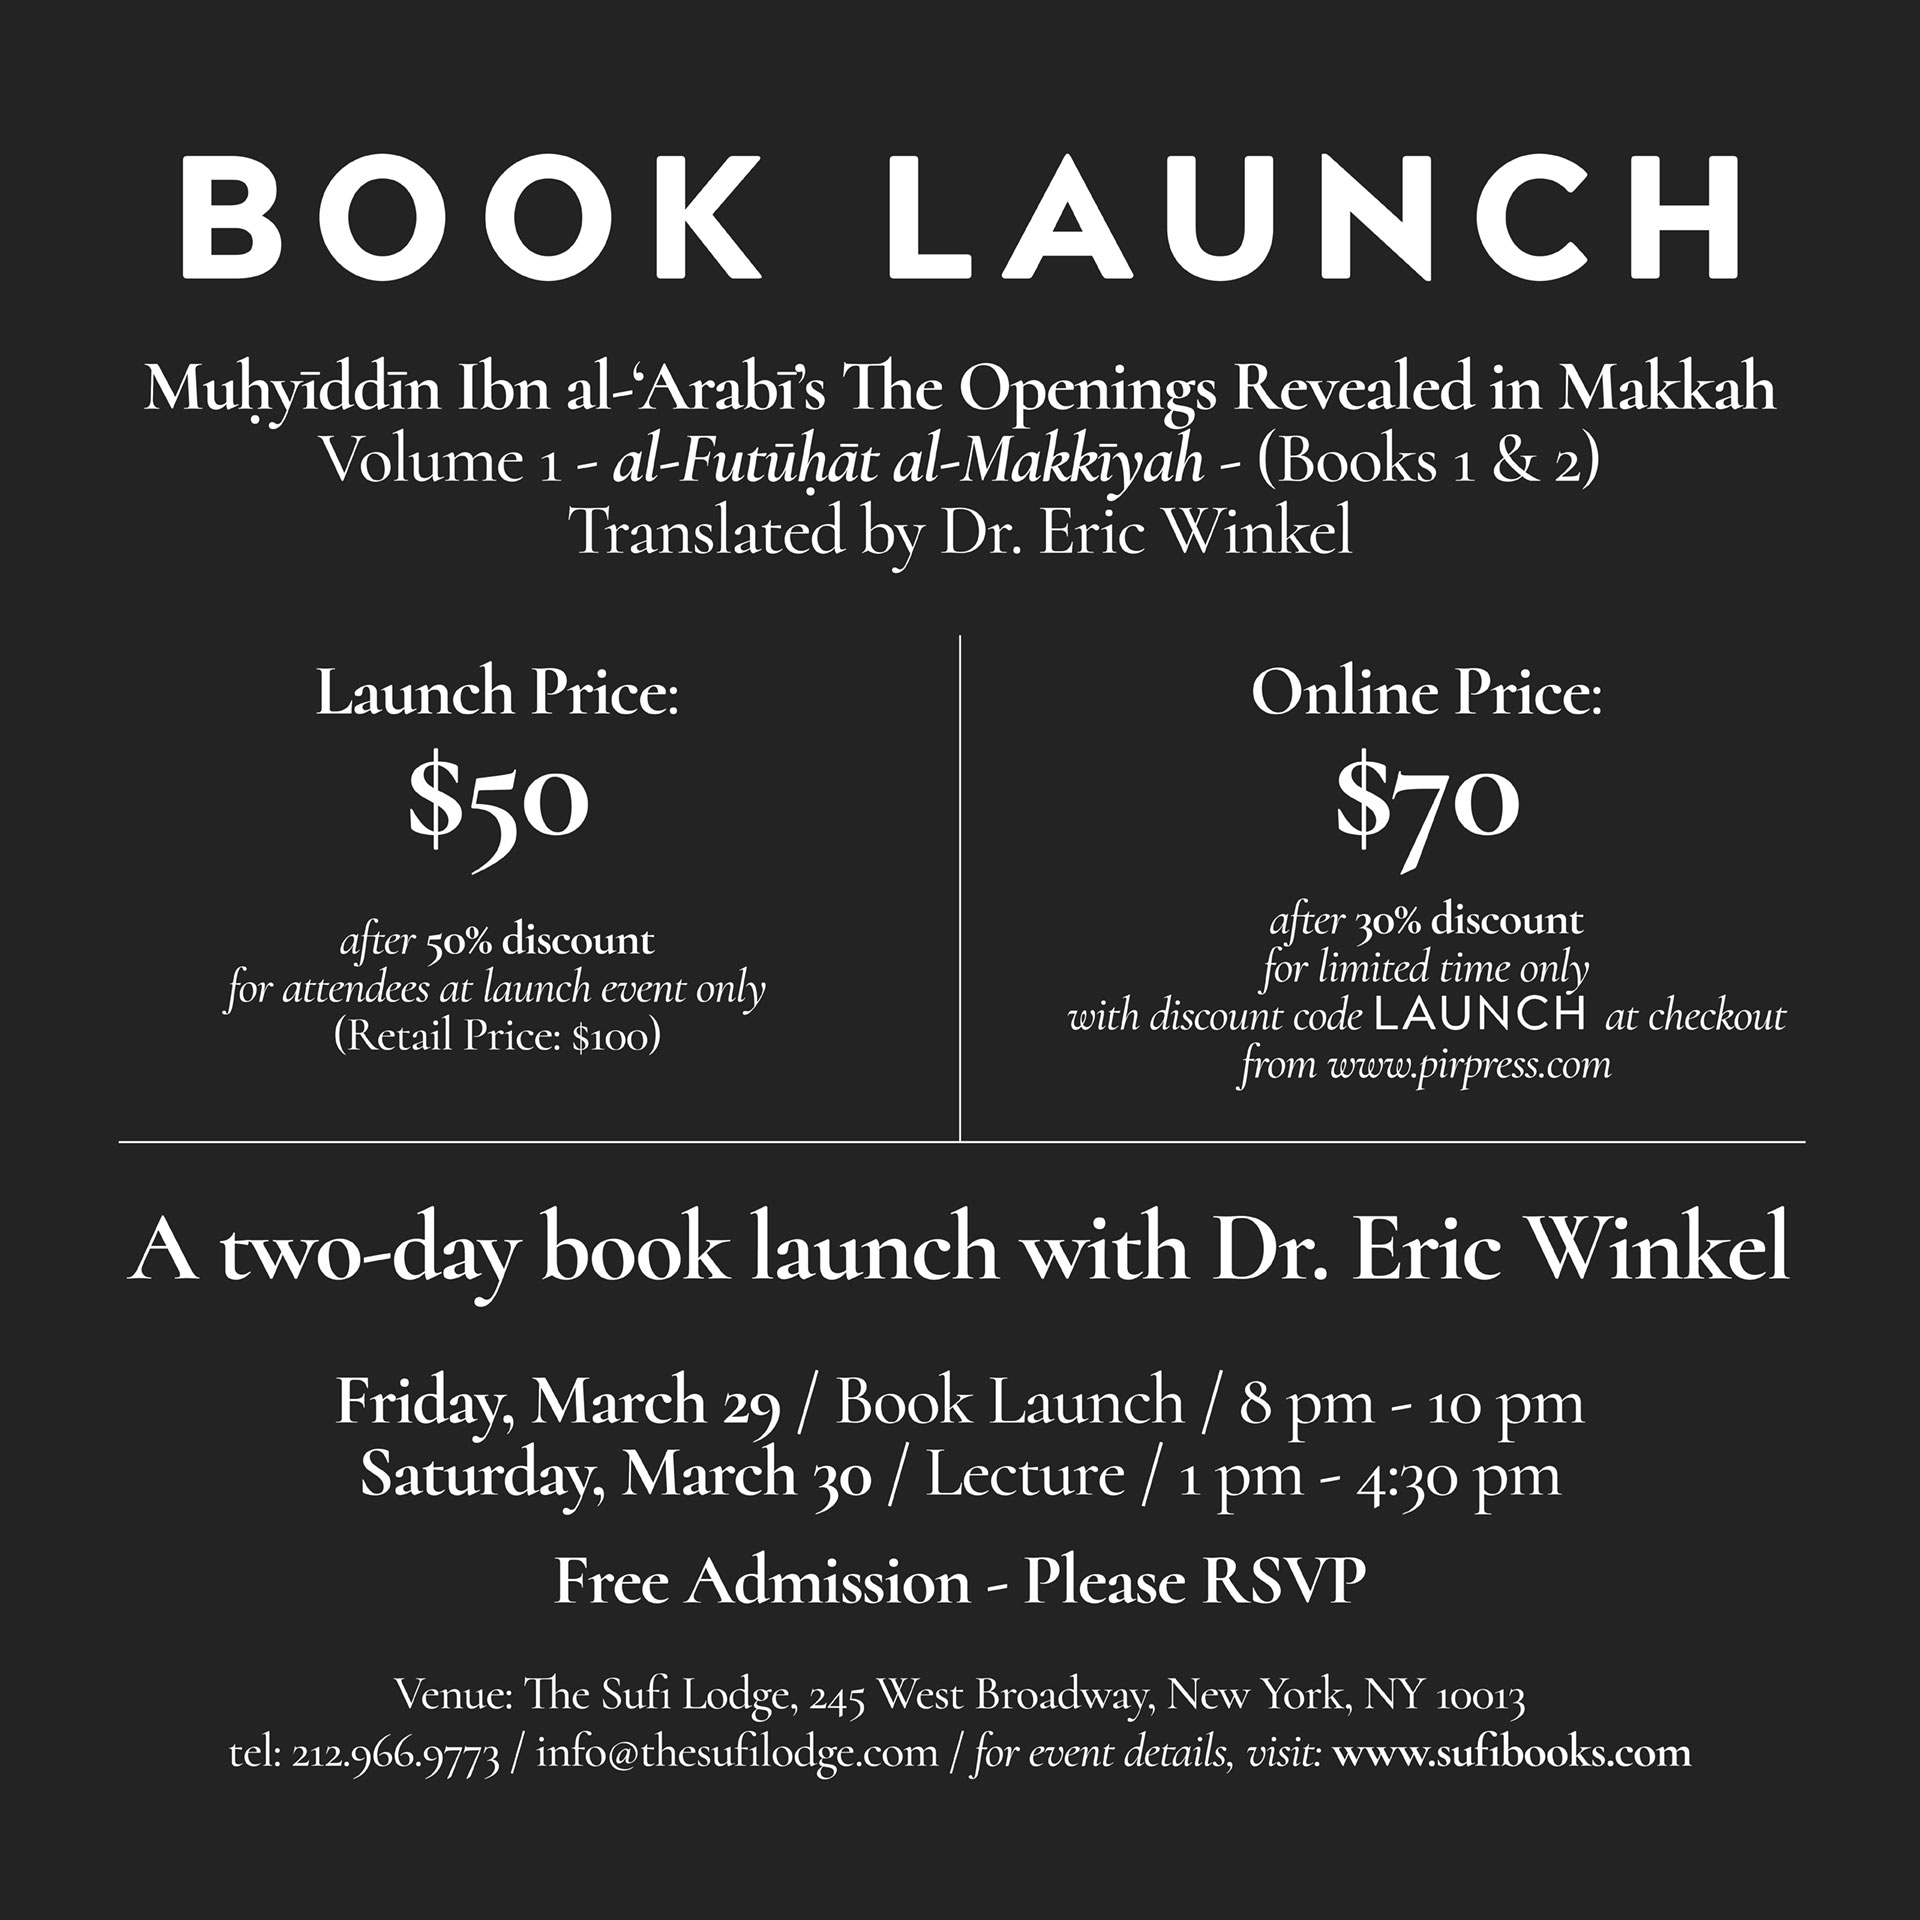 Friday & Saturday, March 29-30, 2019 | Pir Press Book Launch of Muhyiddin Ibn al-Arabi’s The Openings Revealed in Makkah (Volume 1) with Dr. Eric Winkel